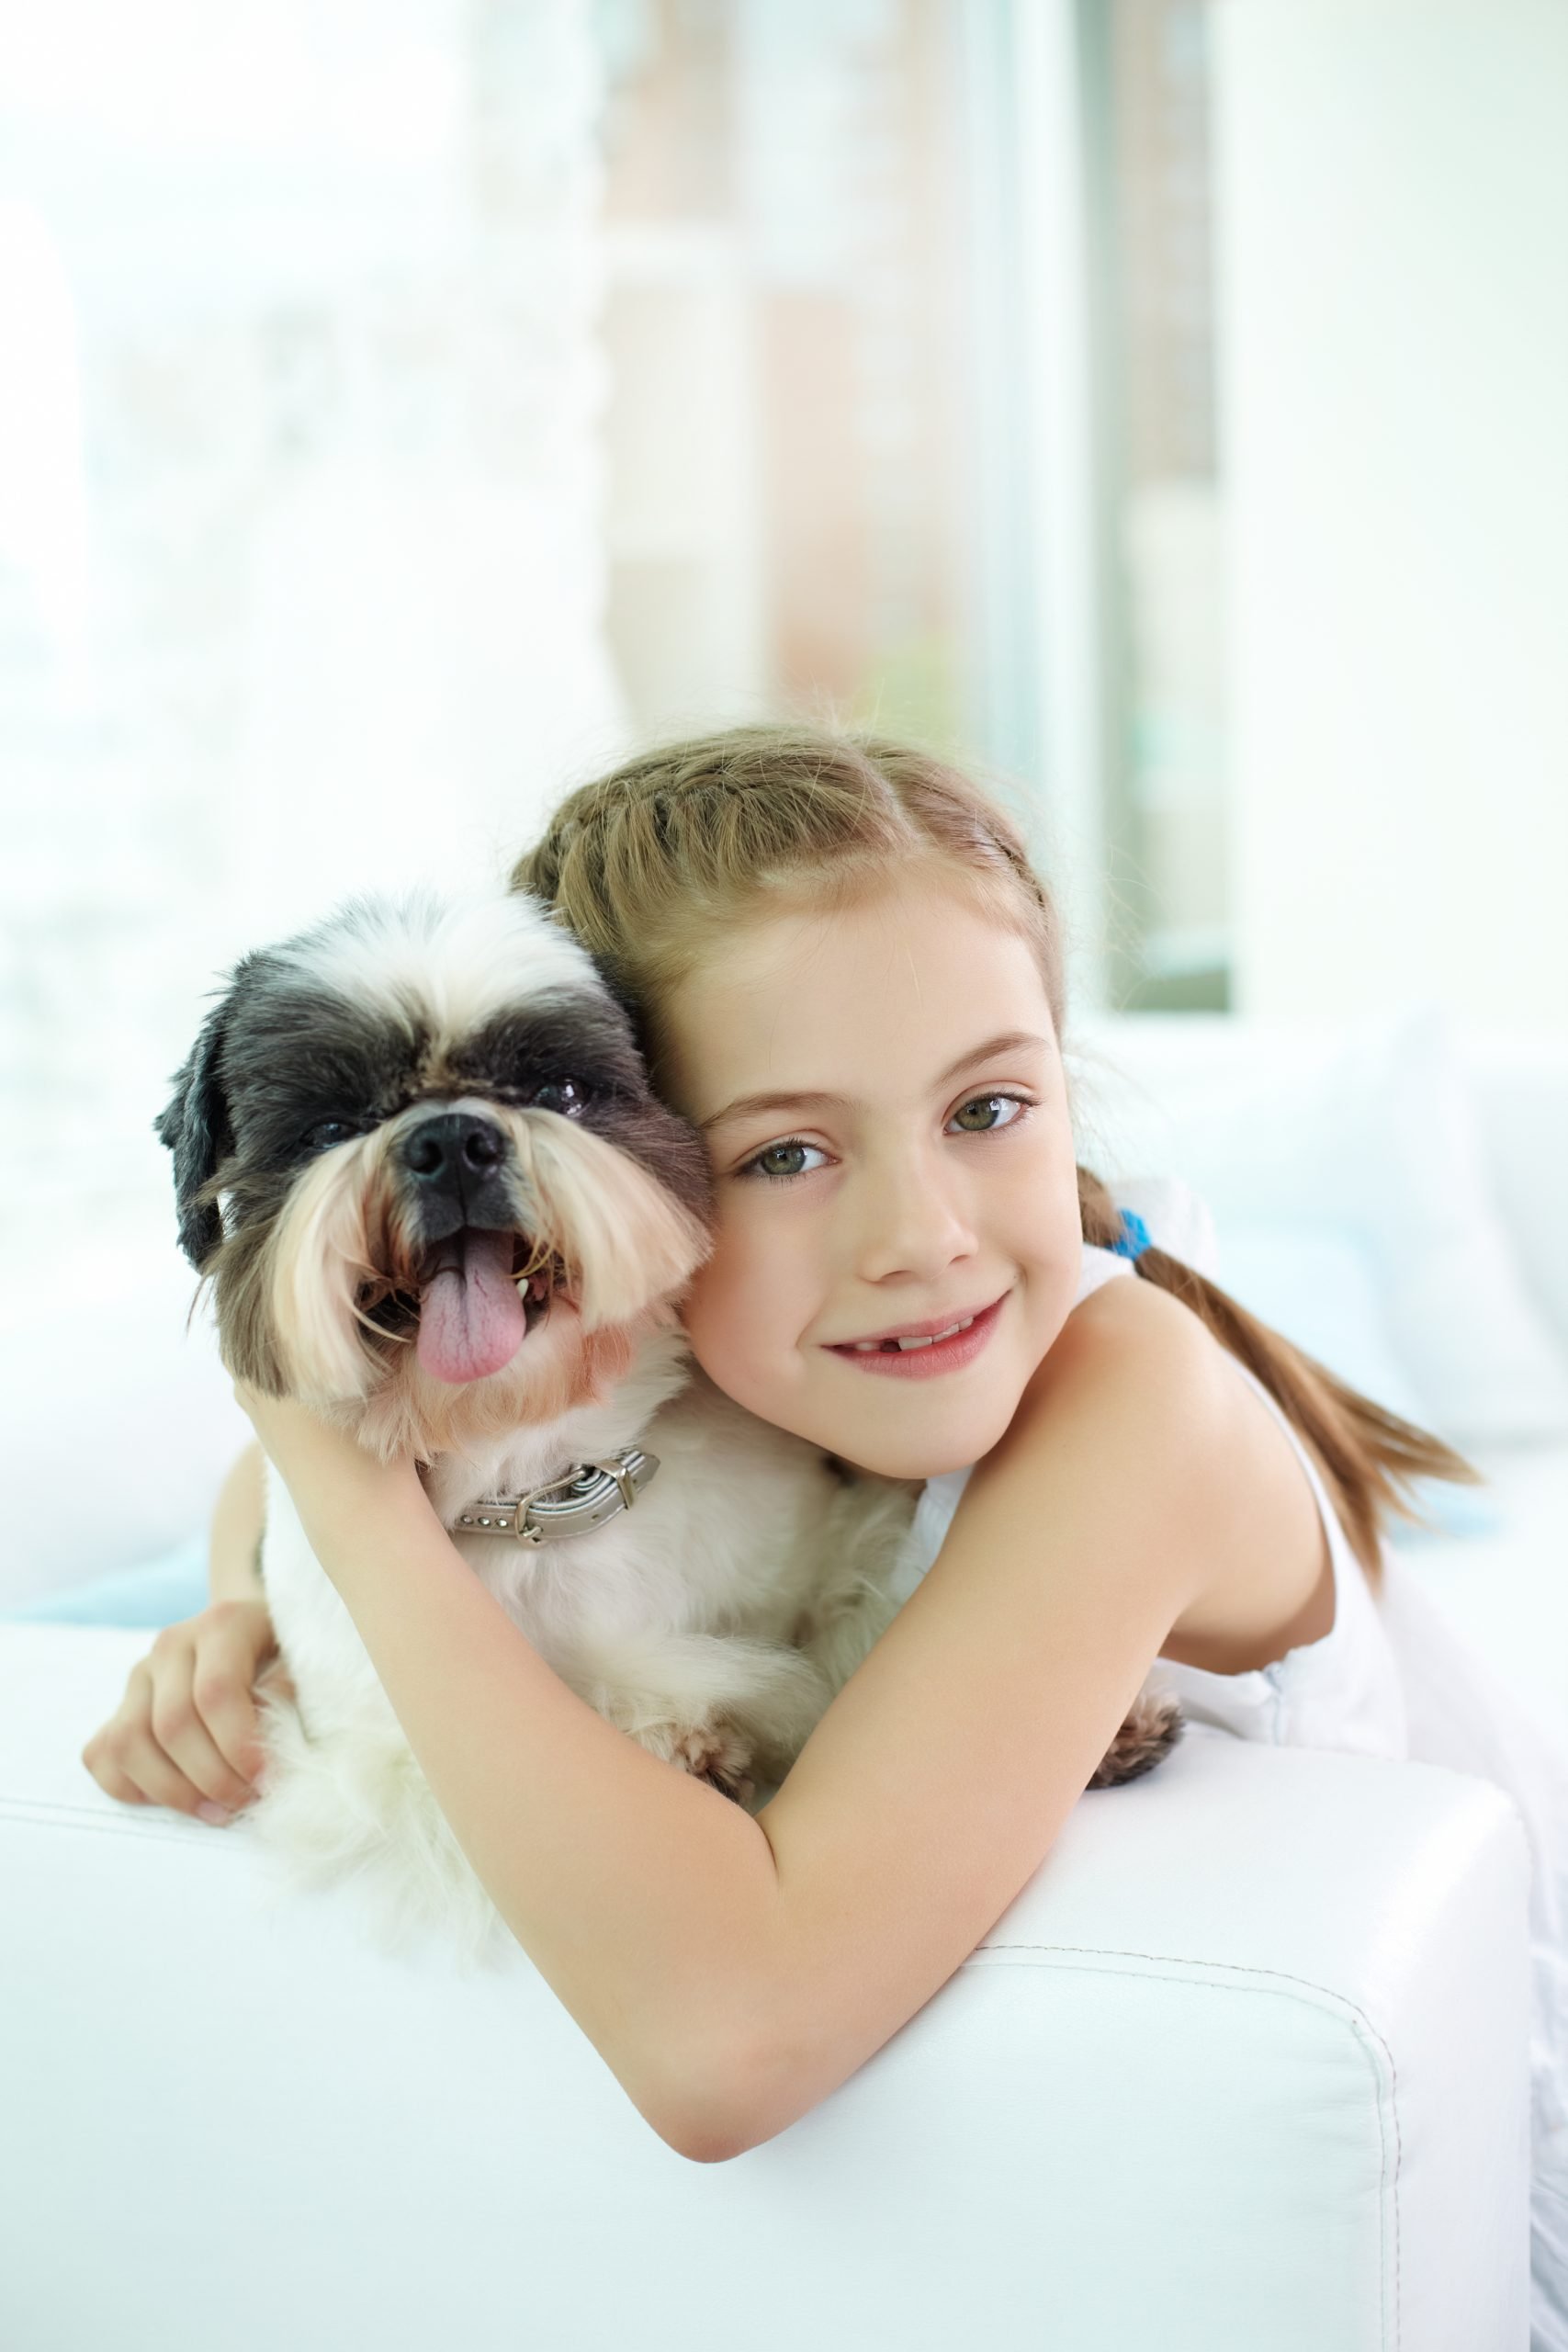 Research Shows Children Who Grow Up With Dogs Are Better Behaved